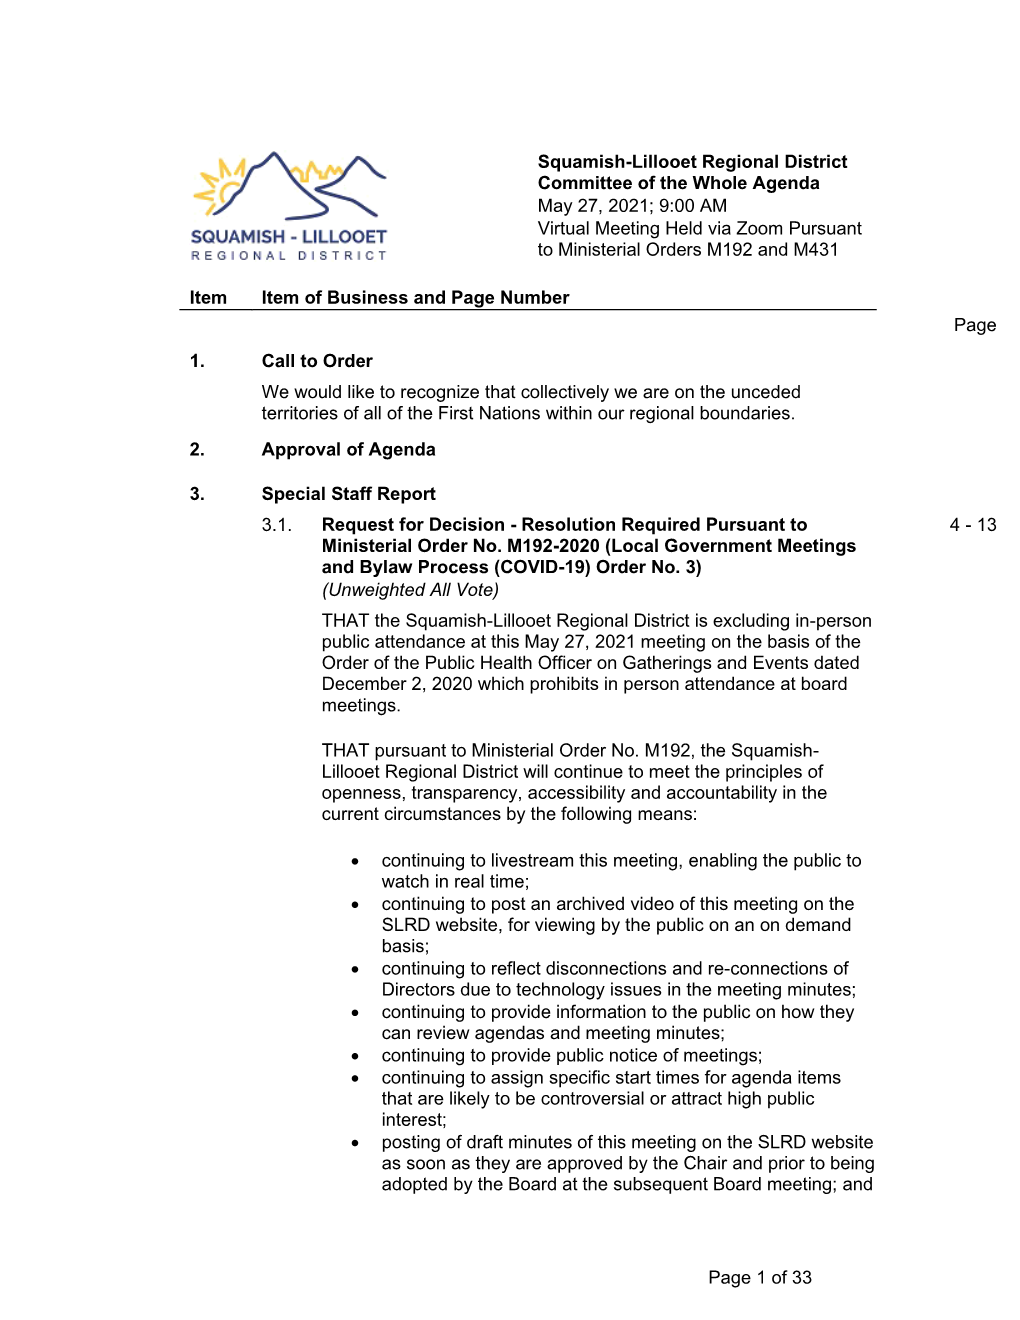 Squamish-Lillooet Regional District Committee of the Whole Agenda May 27, 2021; 9:00 AM Virtual Meeting Held Via Zoom Pursuant to Ministerial Orders M192 and M431